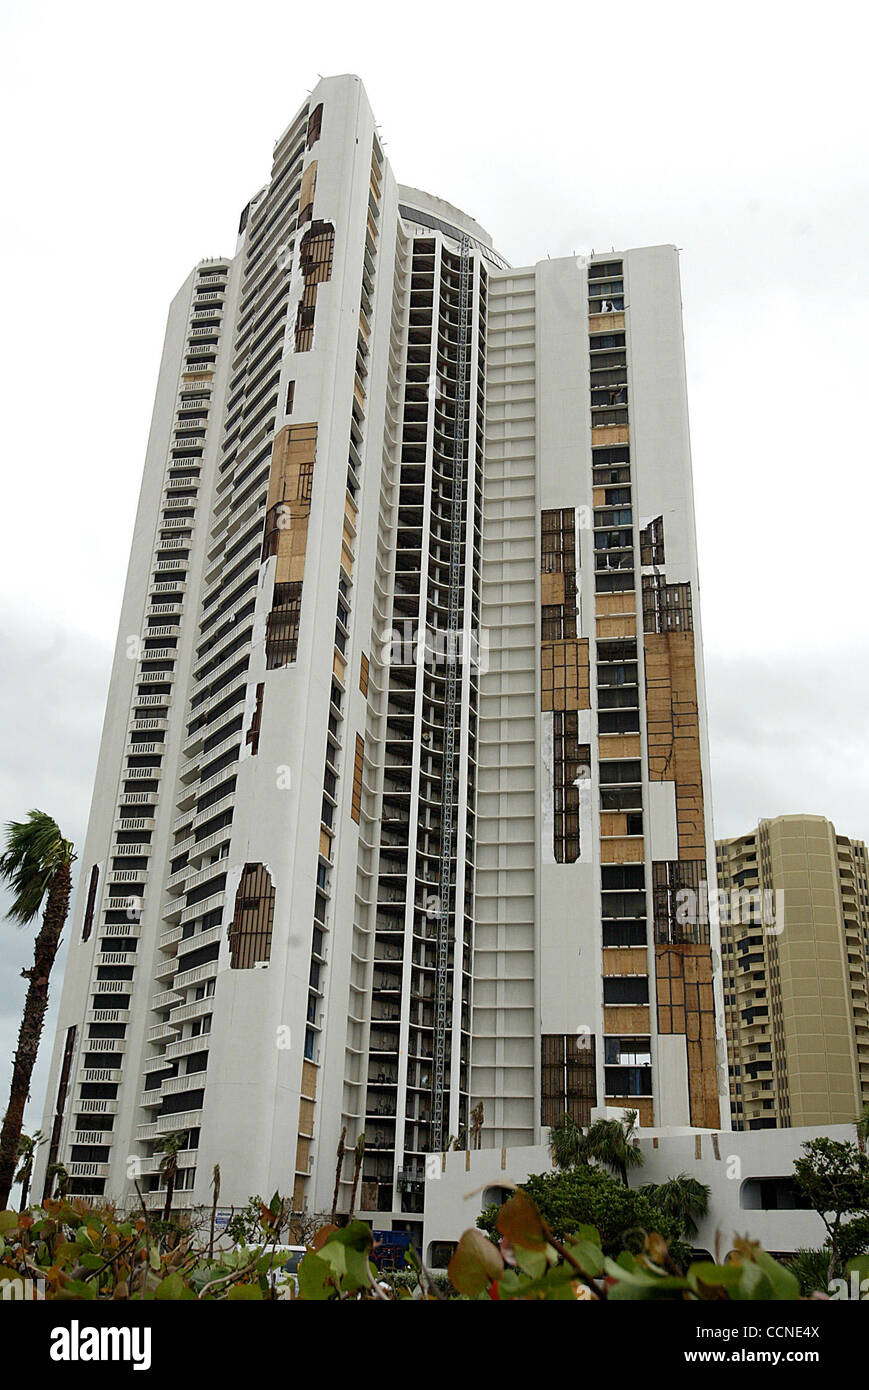 RIVIERA BEACH - The Tiara, a large high rise condominium complex on the beach in Riviera Beach, received damage from hurricane Jeanne.  The building had also been damaged from hurricane Frances.  Photo by Damon Higgins/The Palm Beach Post/092604  OUT SUN SENTINEL. OUT STUART NEWS. OUT MAGAZINES. NO  Stock Photo